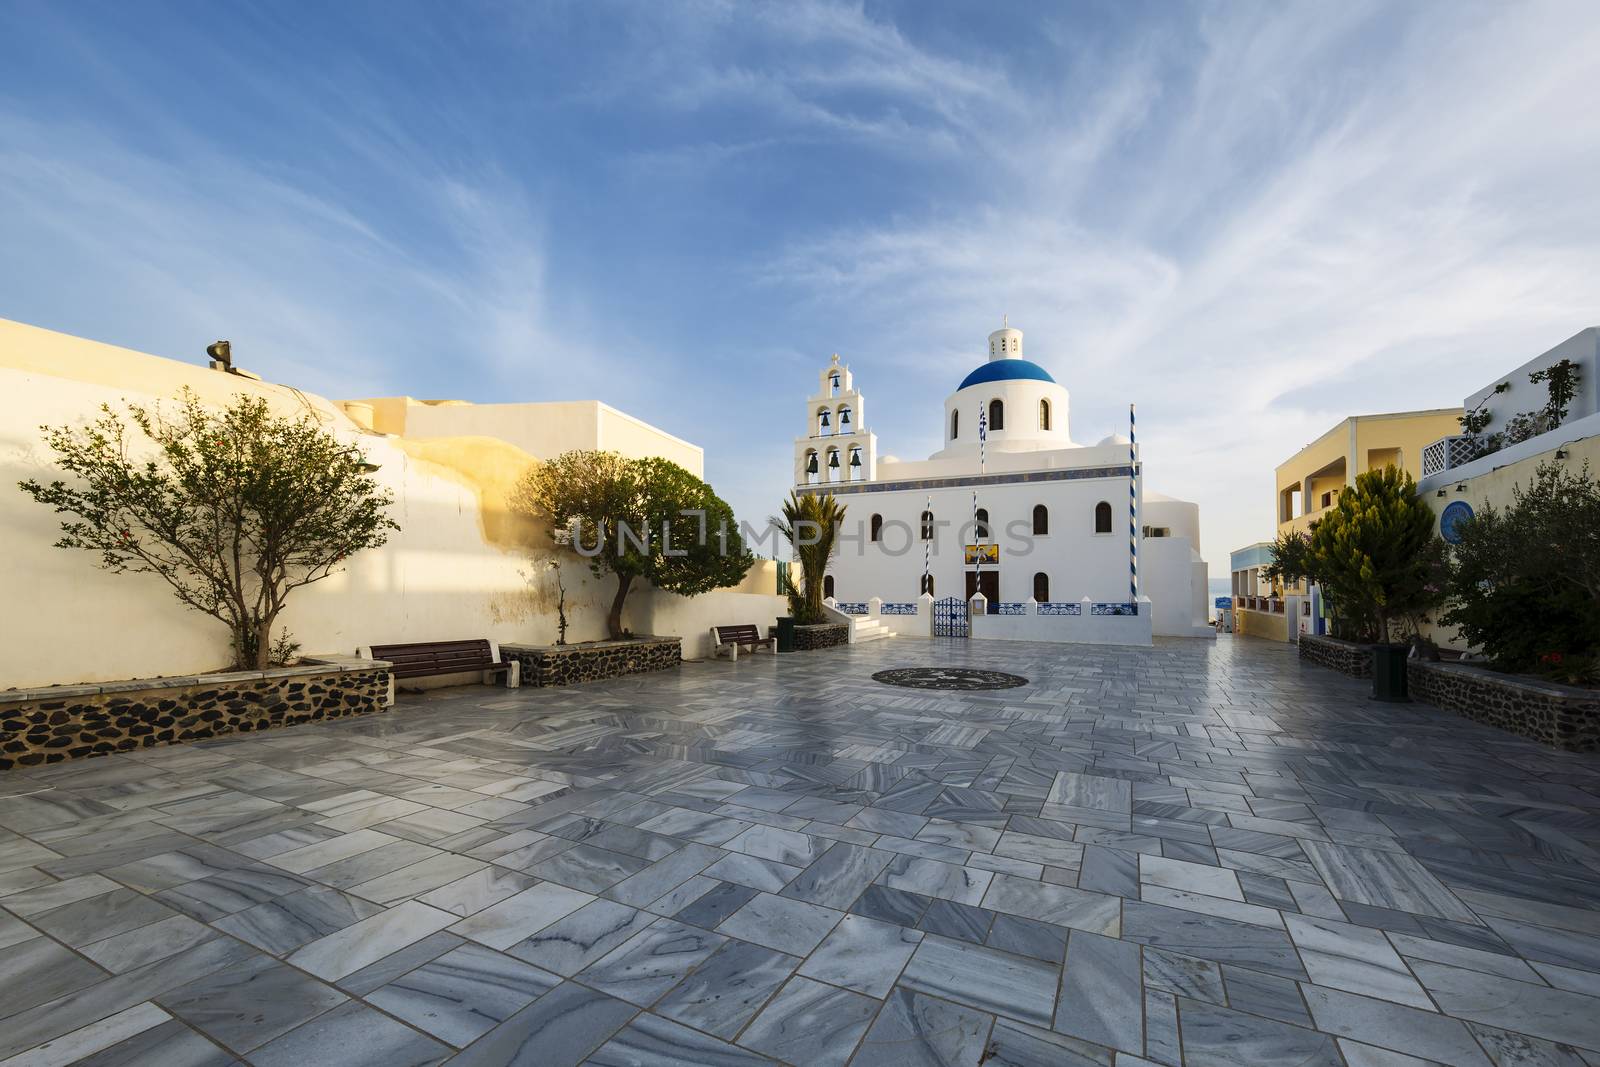 Main white blue orthodox church of Panagia Platsani, in the vill by vwalakte